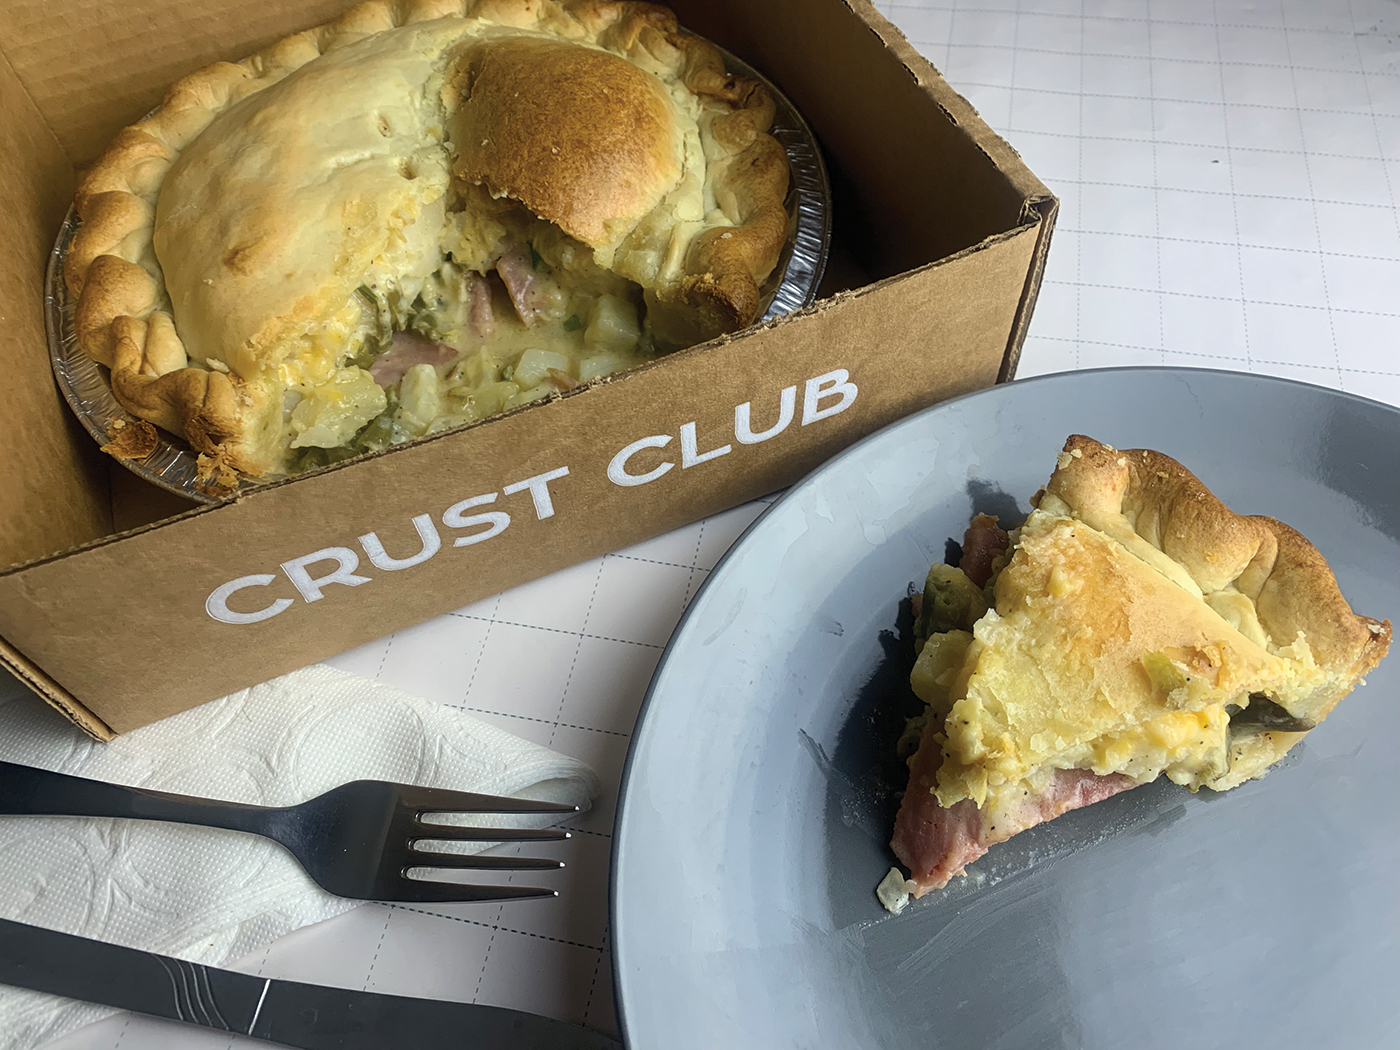 Crust Club’s Funeral Potato Pot Pie makes for a prime comfort meal built with plenty of starches and proteins to enjoy.